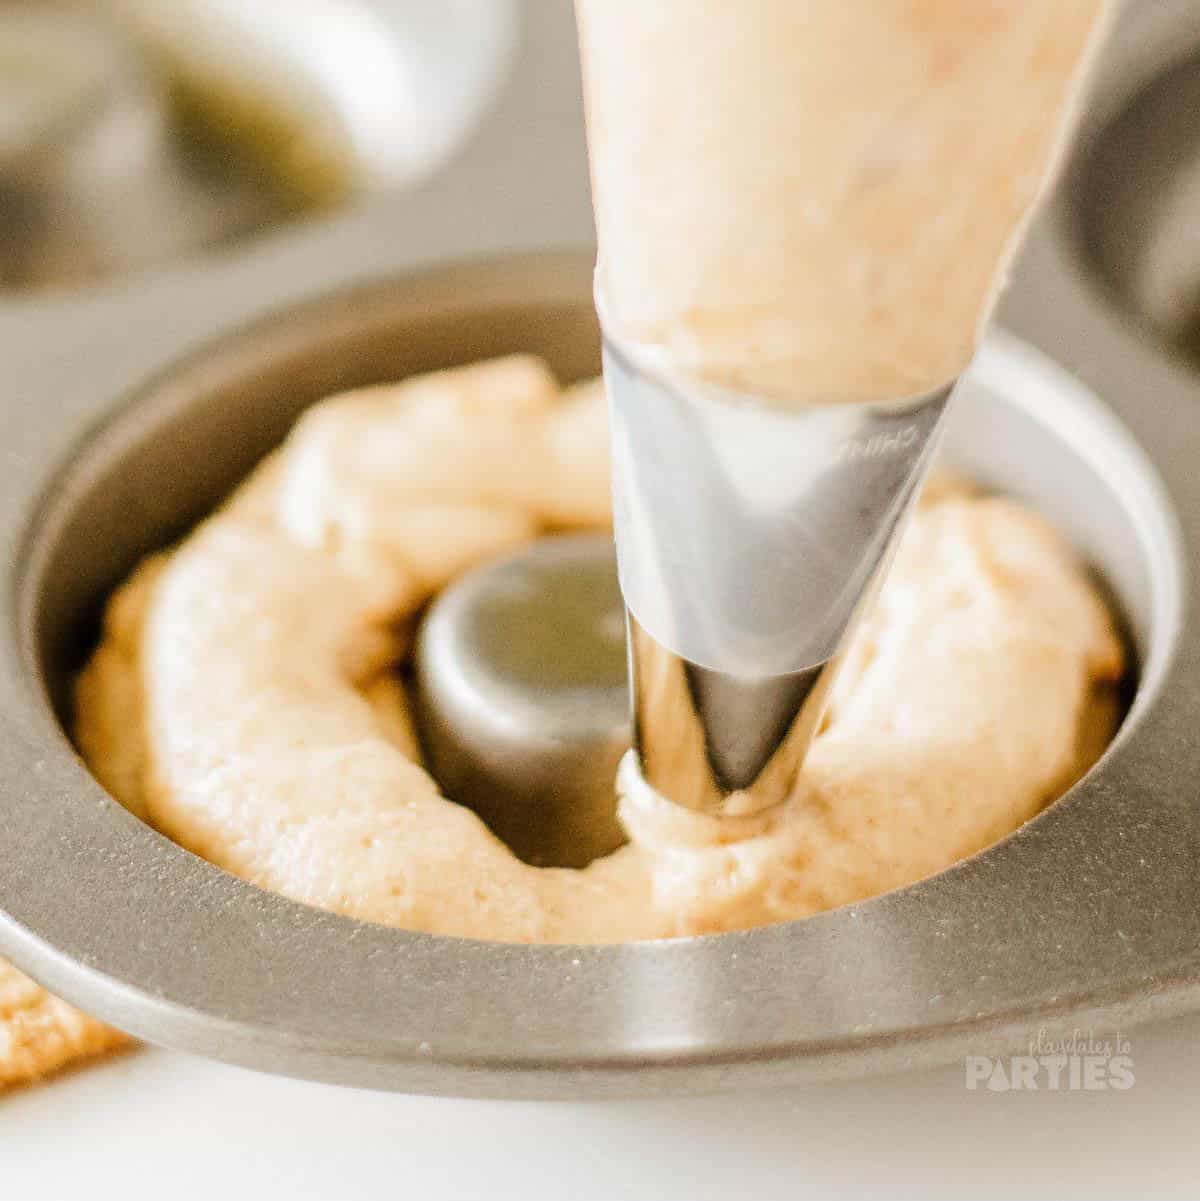 Using a piping bag to put donut batter into a pan.